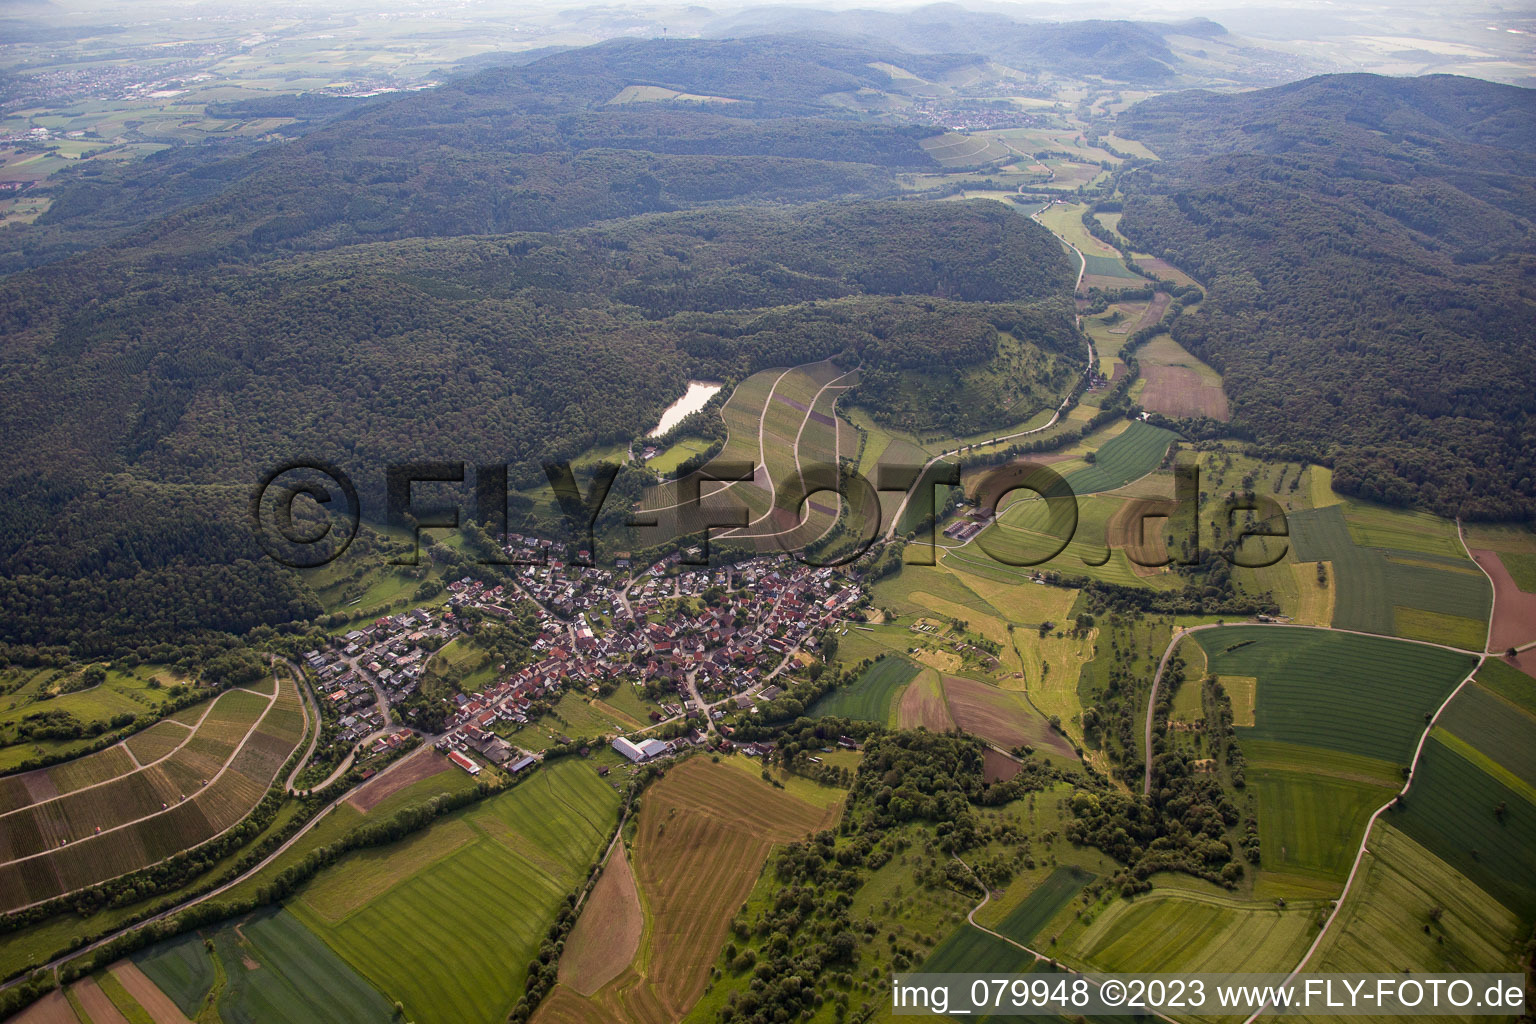 Village - view on the edge of agricultural fields and farmland in the district Haefnerhaslach in Sachsenheim in the state Baden-Wurttemberg, Germany